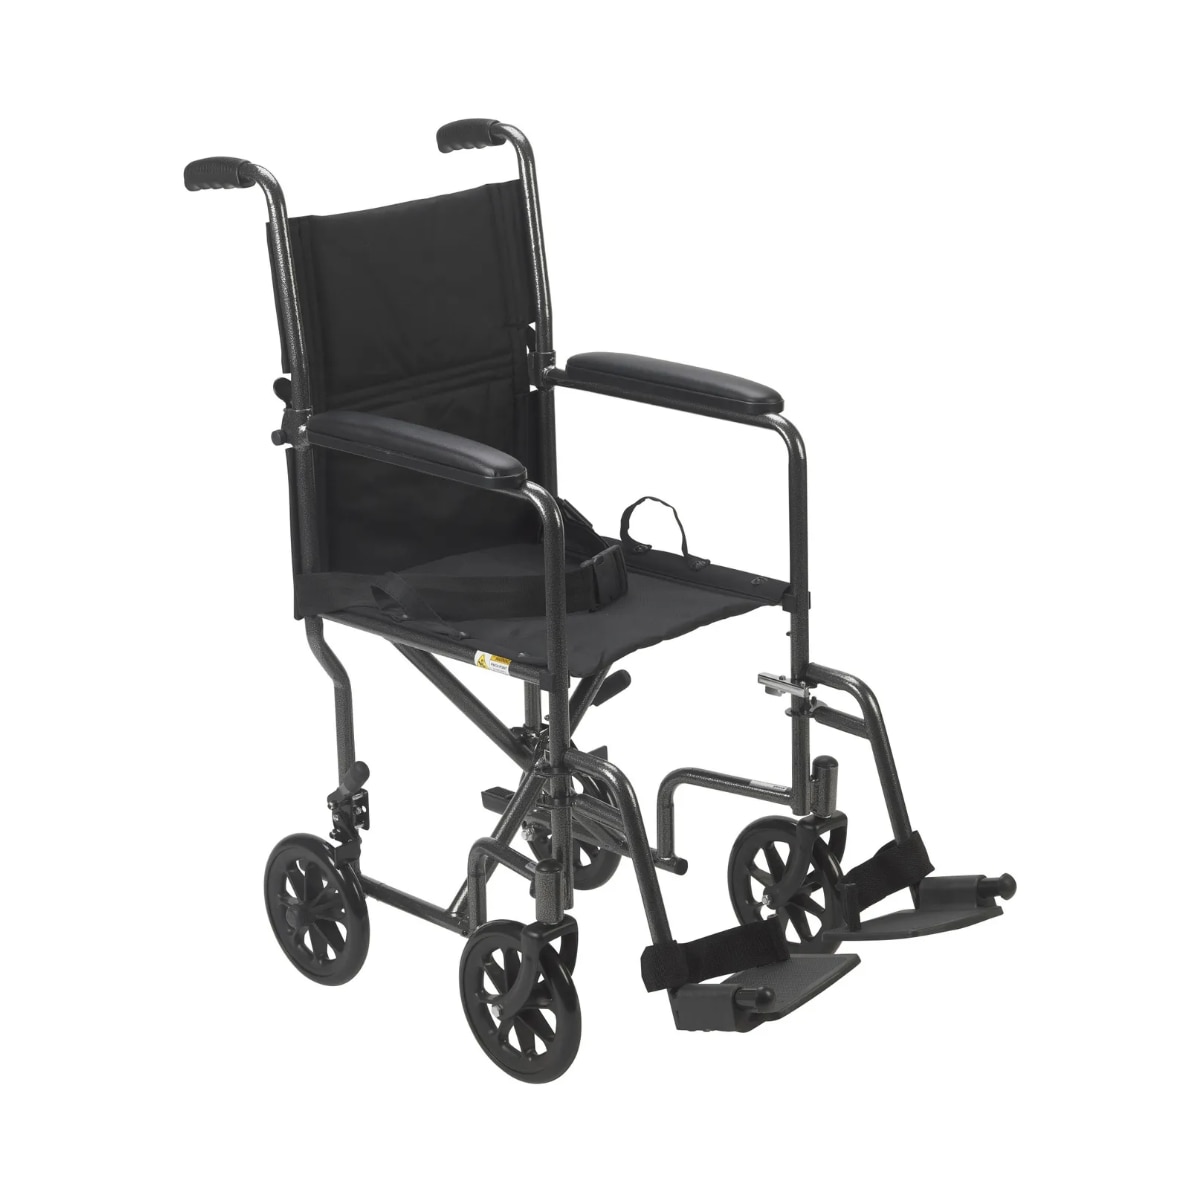 Drive Steel Transport Chair with a simple design and black frame and fabric